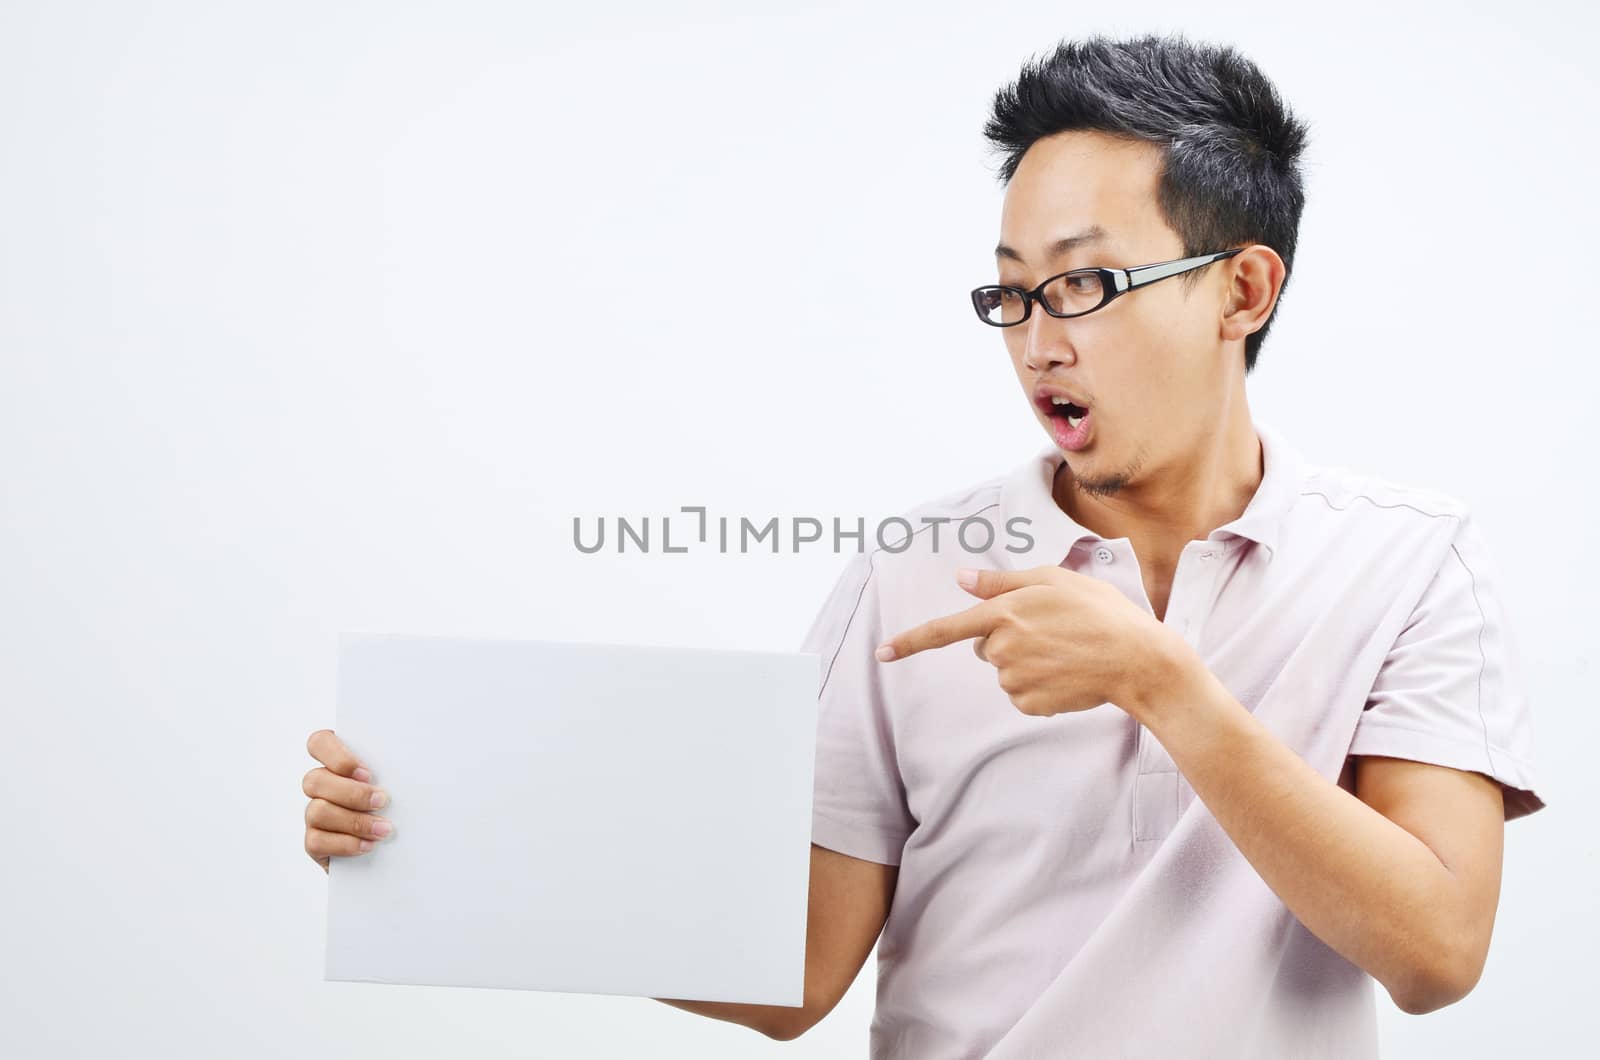 Portrait of shocked Asian man hand holding white blank paper card, standing isolated on plain background.